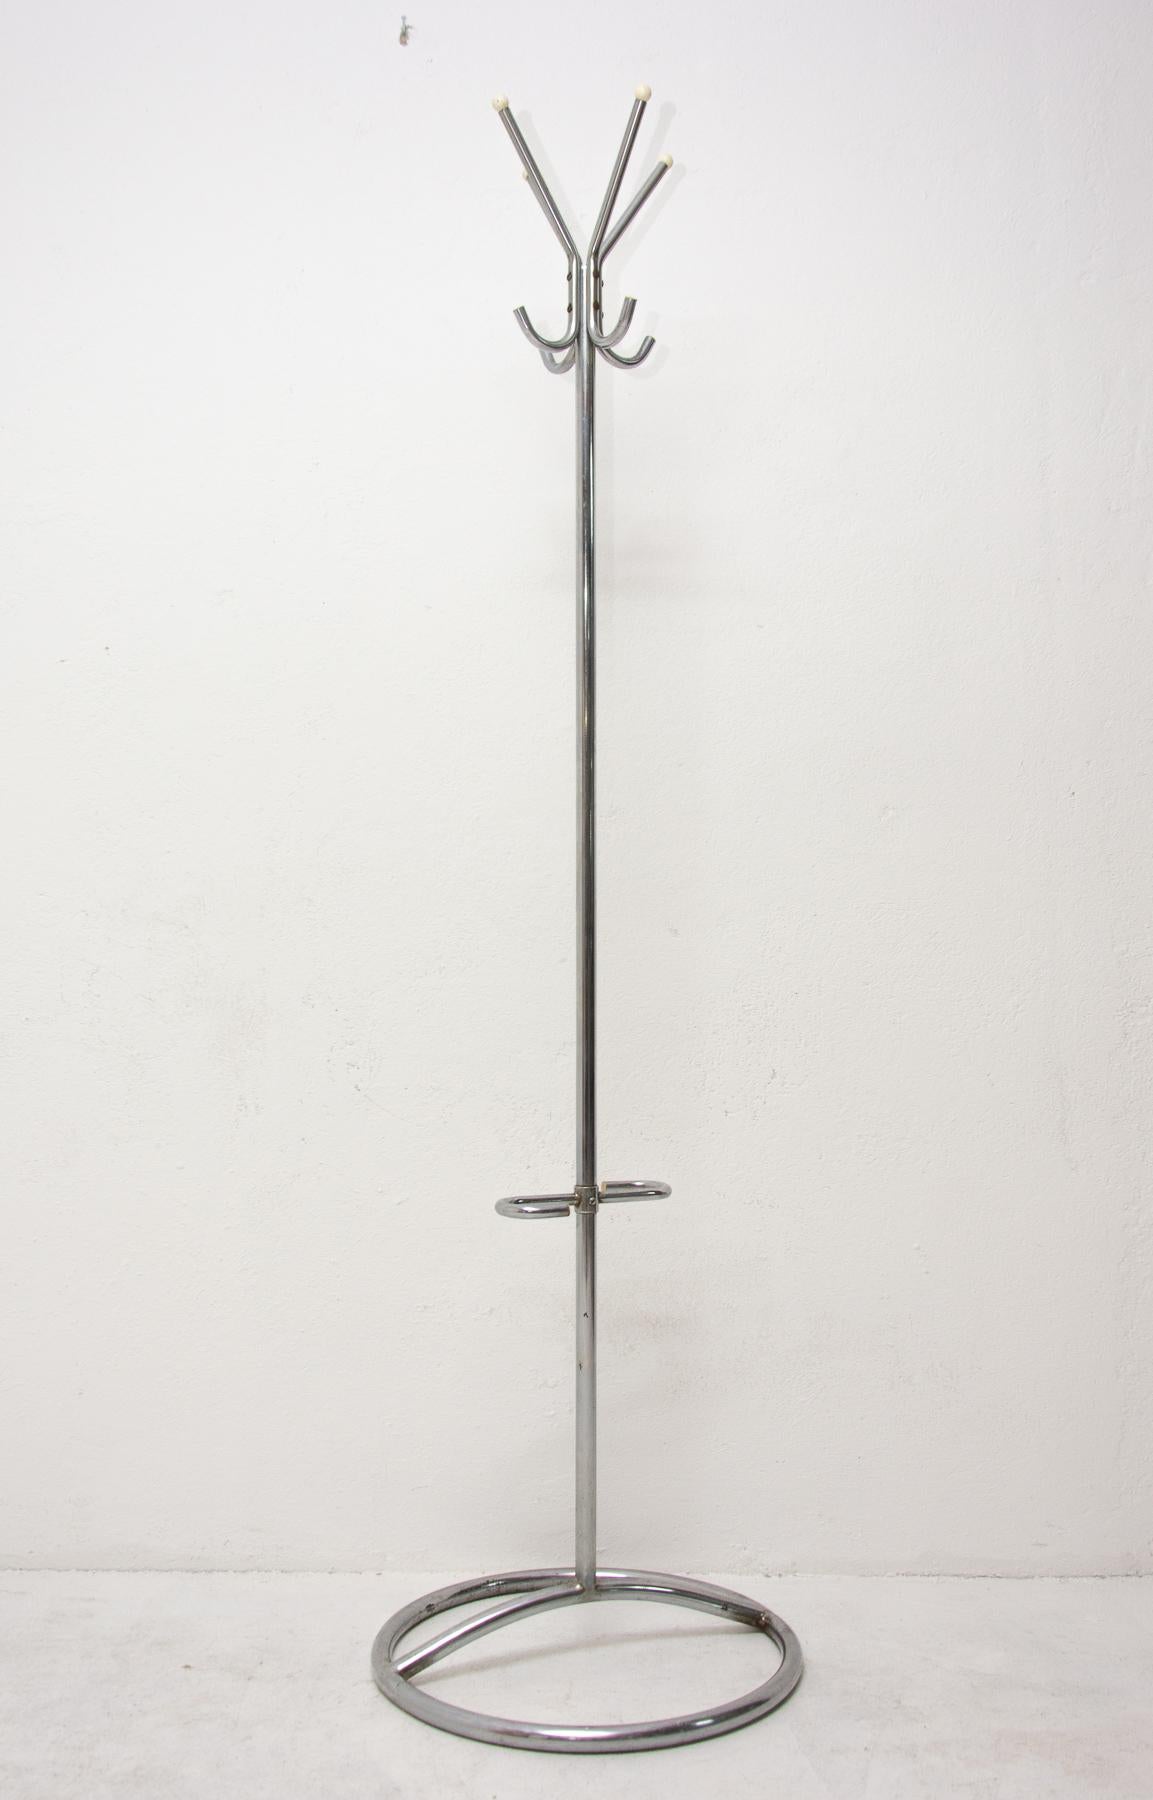 A beautiful example of Bohemian pre-war functionalism represents this model of coat rack. This hanger was designed and made probably by Gottwald or Slezák company in Bohemia in the 1930s.
It features a full-chrome structure with round tips at the